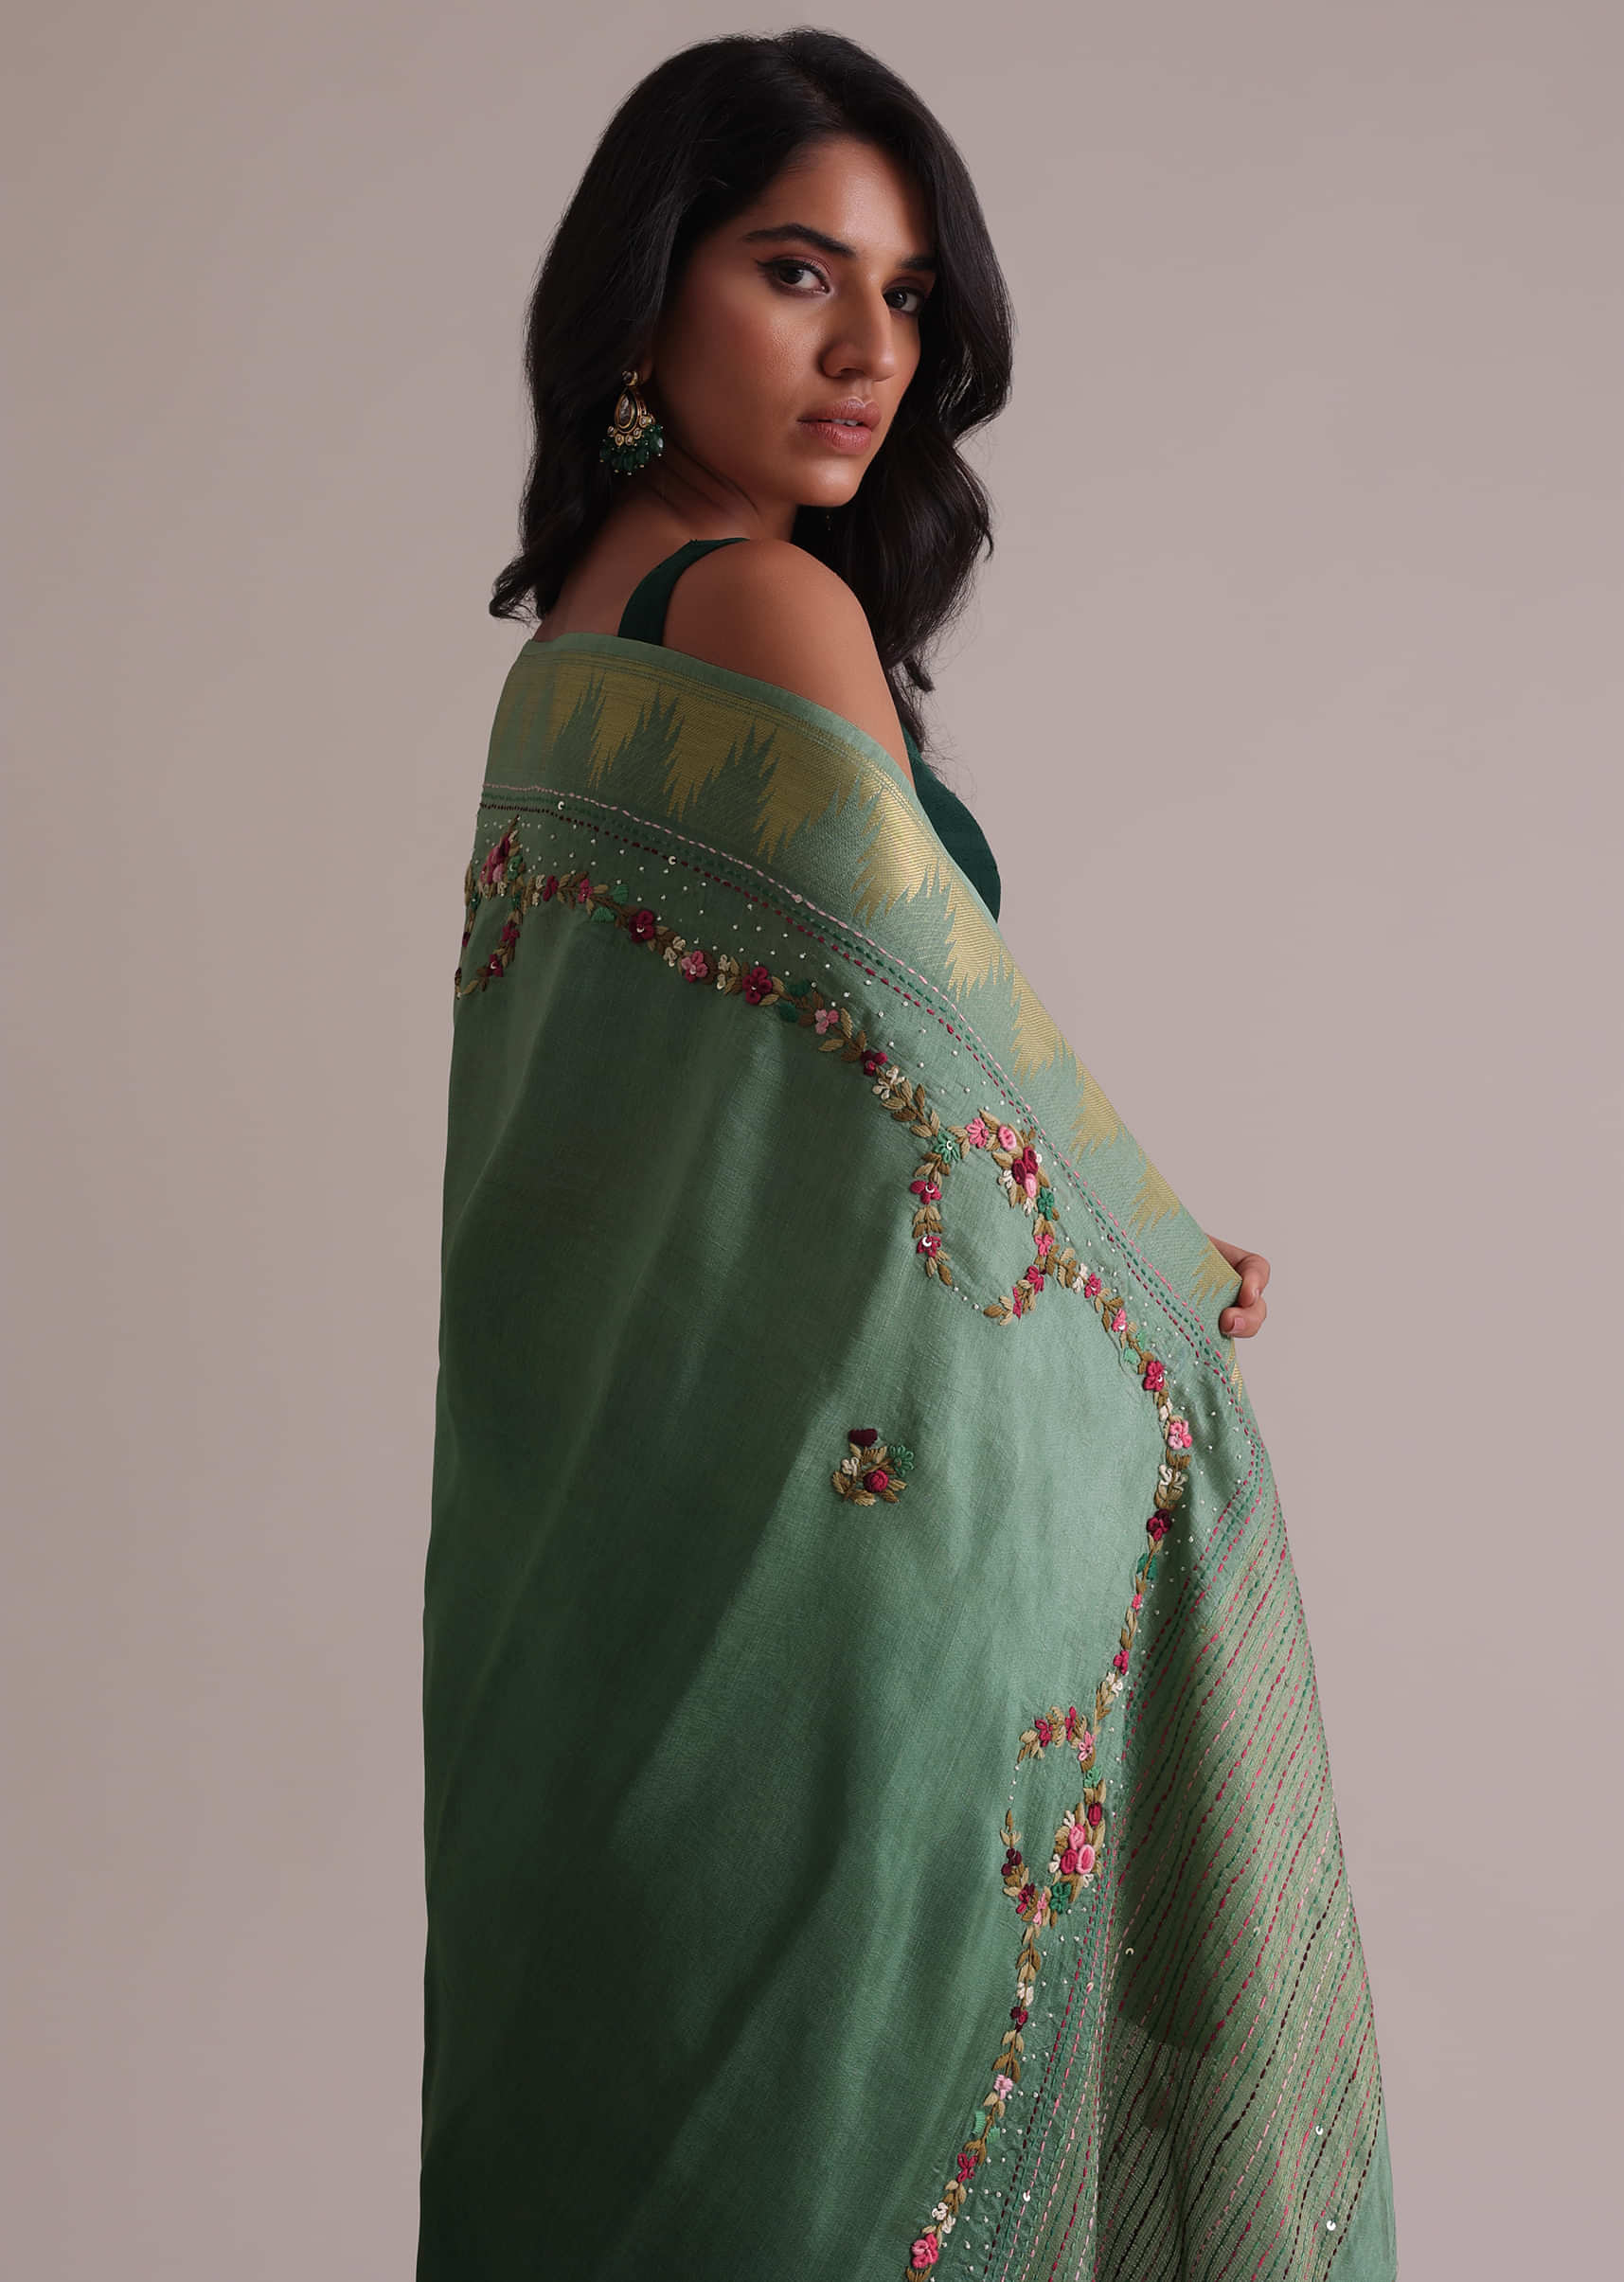 Dual-Tone Green Ombre Saree In Dola Crepe With Resham 3D Bud Embroidery